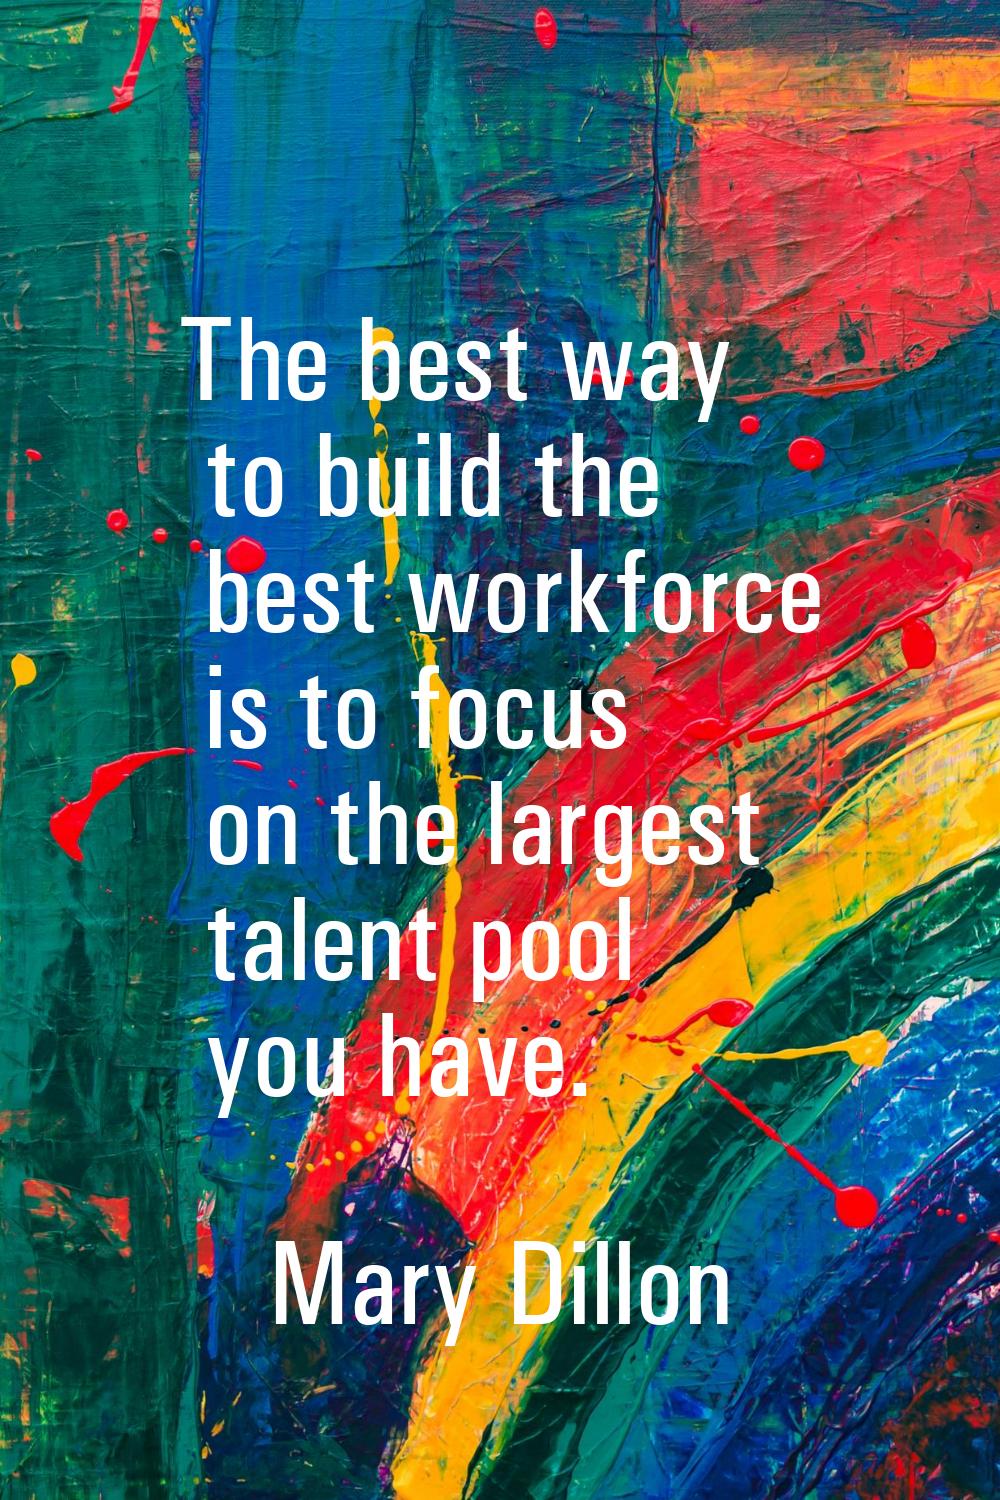 The best way to build the best workforce is to focus on the largest talent pool you have.